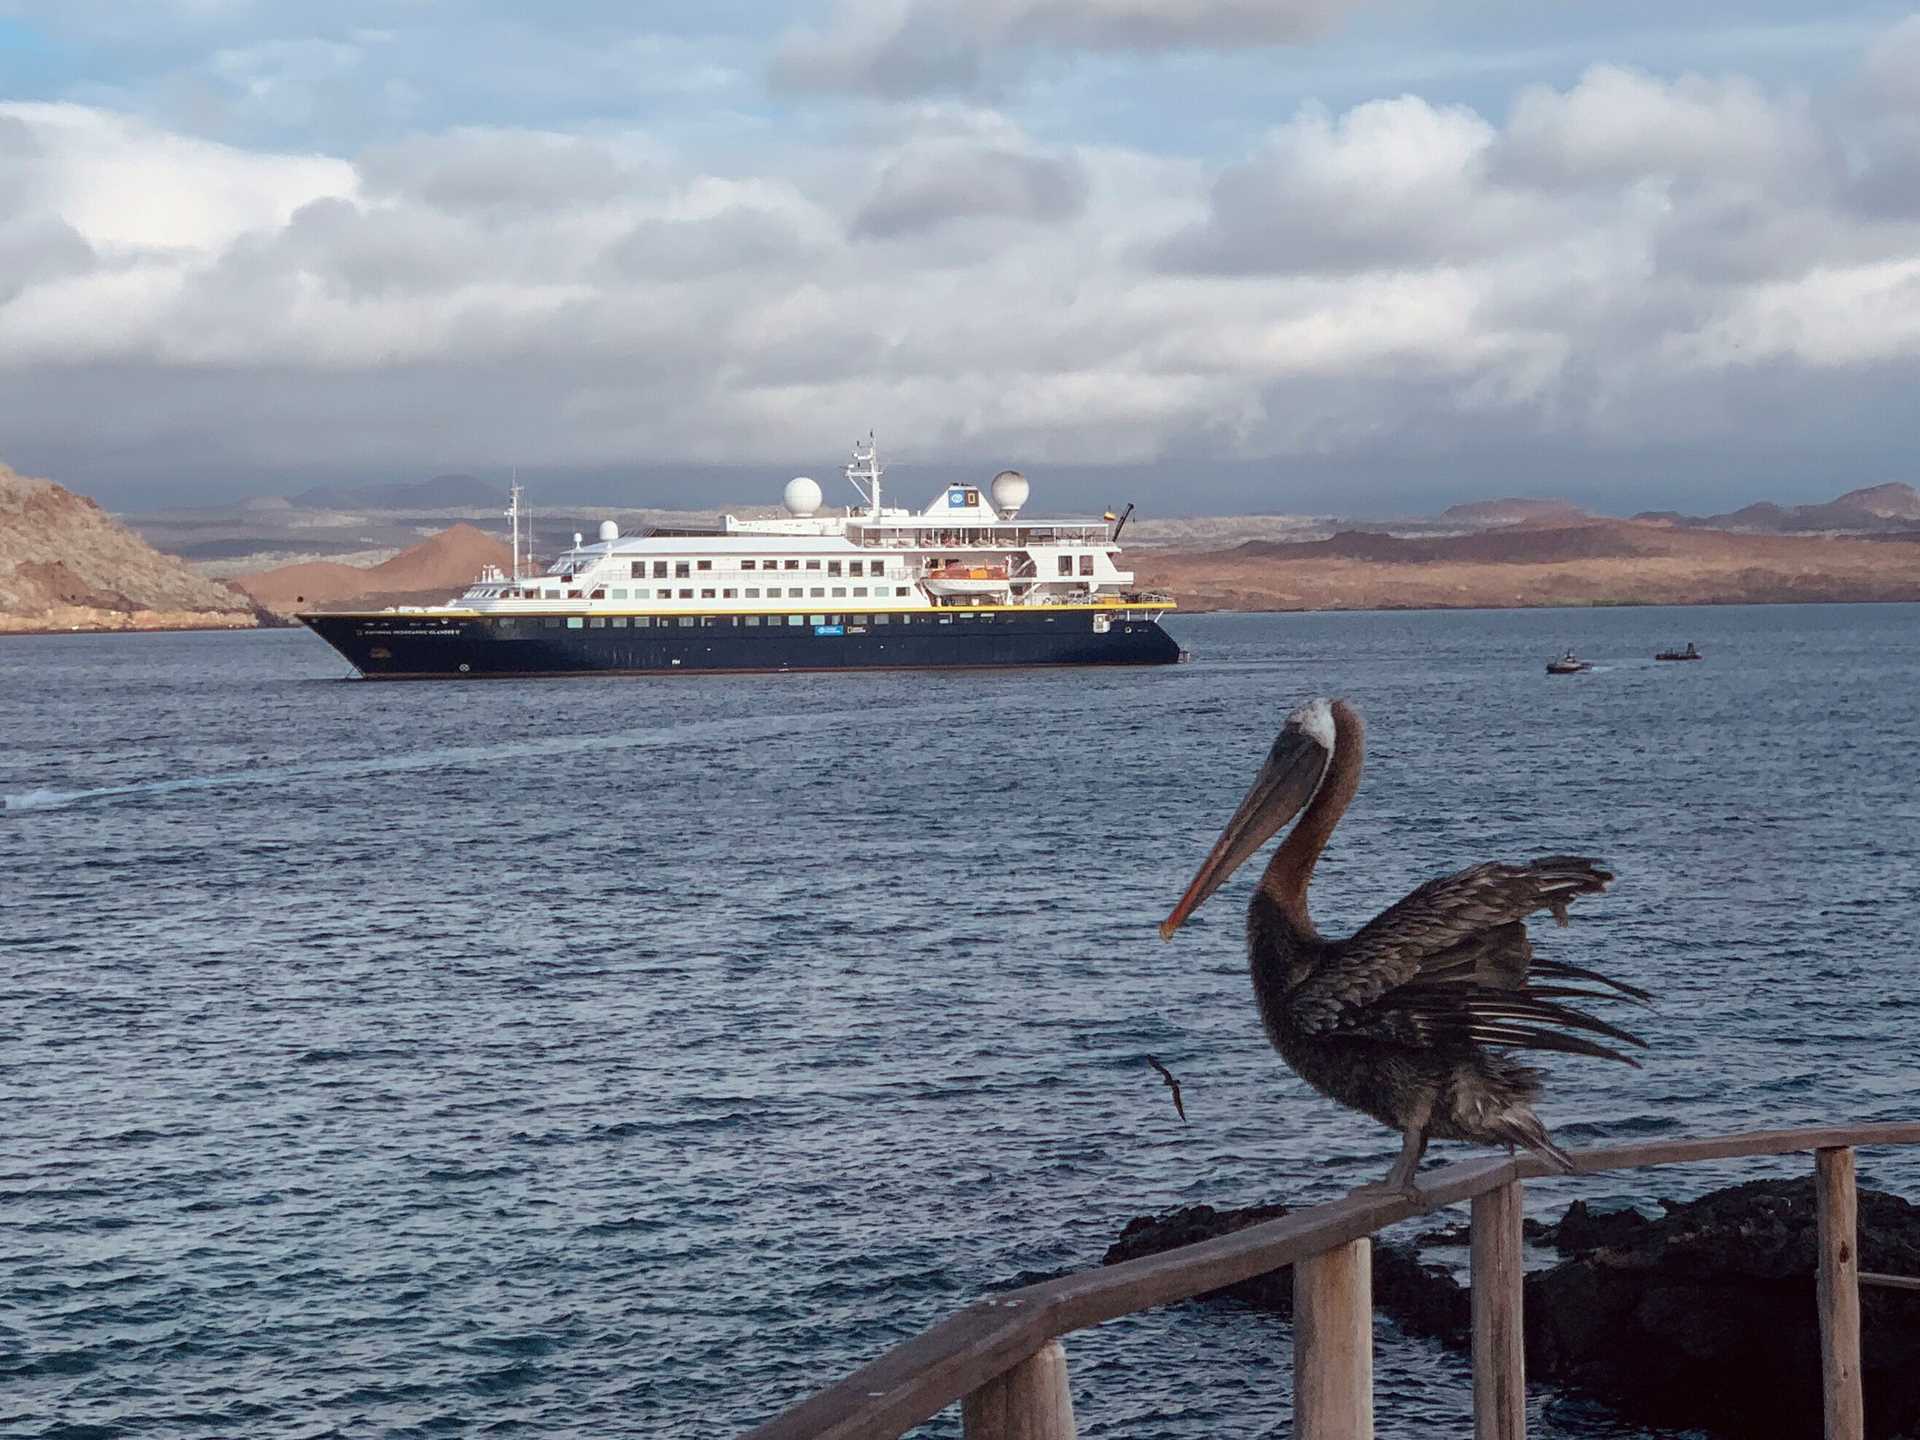 a pelican in the foreground looks at a ship in the water behind it